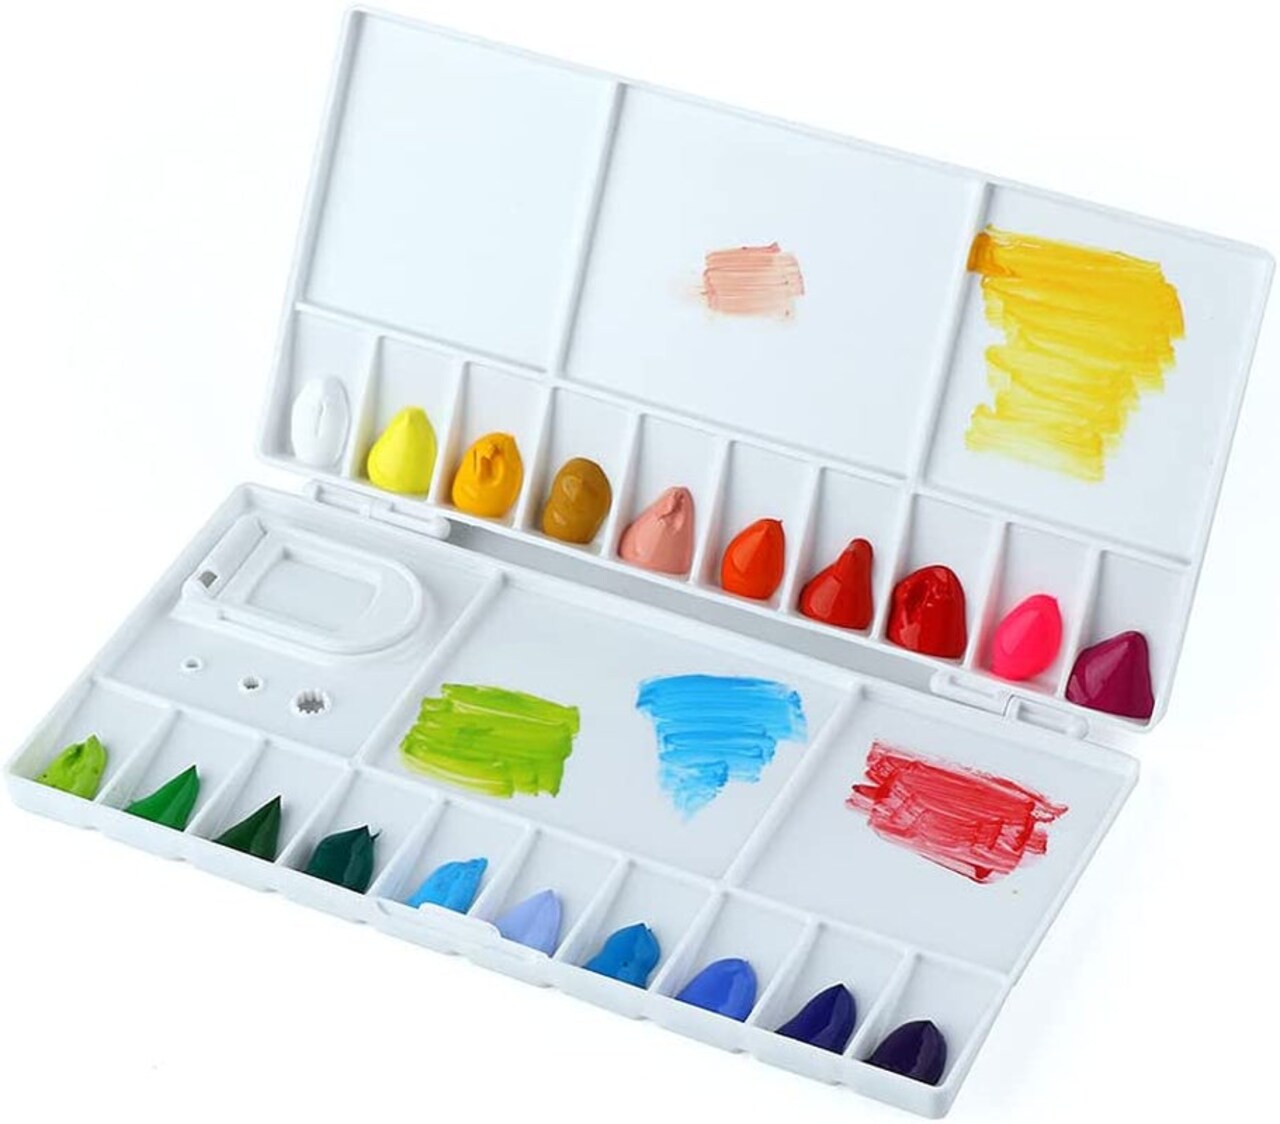 Transon Paint Palette Box 33 Wells for Mixing Gouache, Acrylic and Oil Paint  with 1 Paint Brush